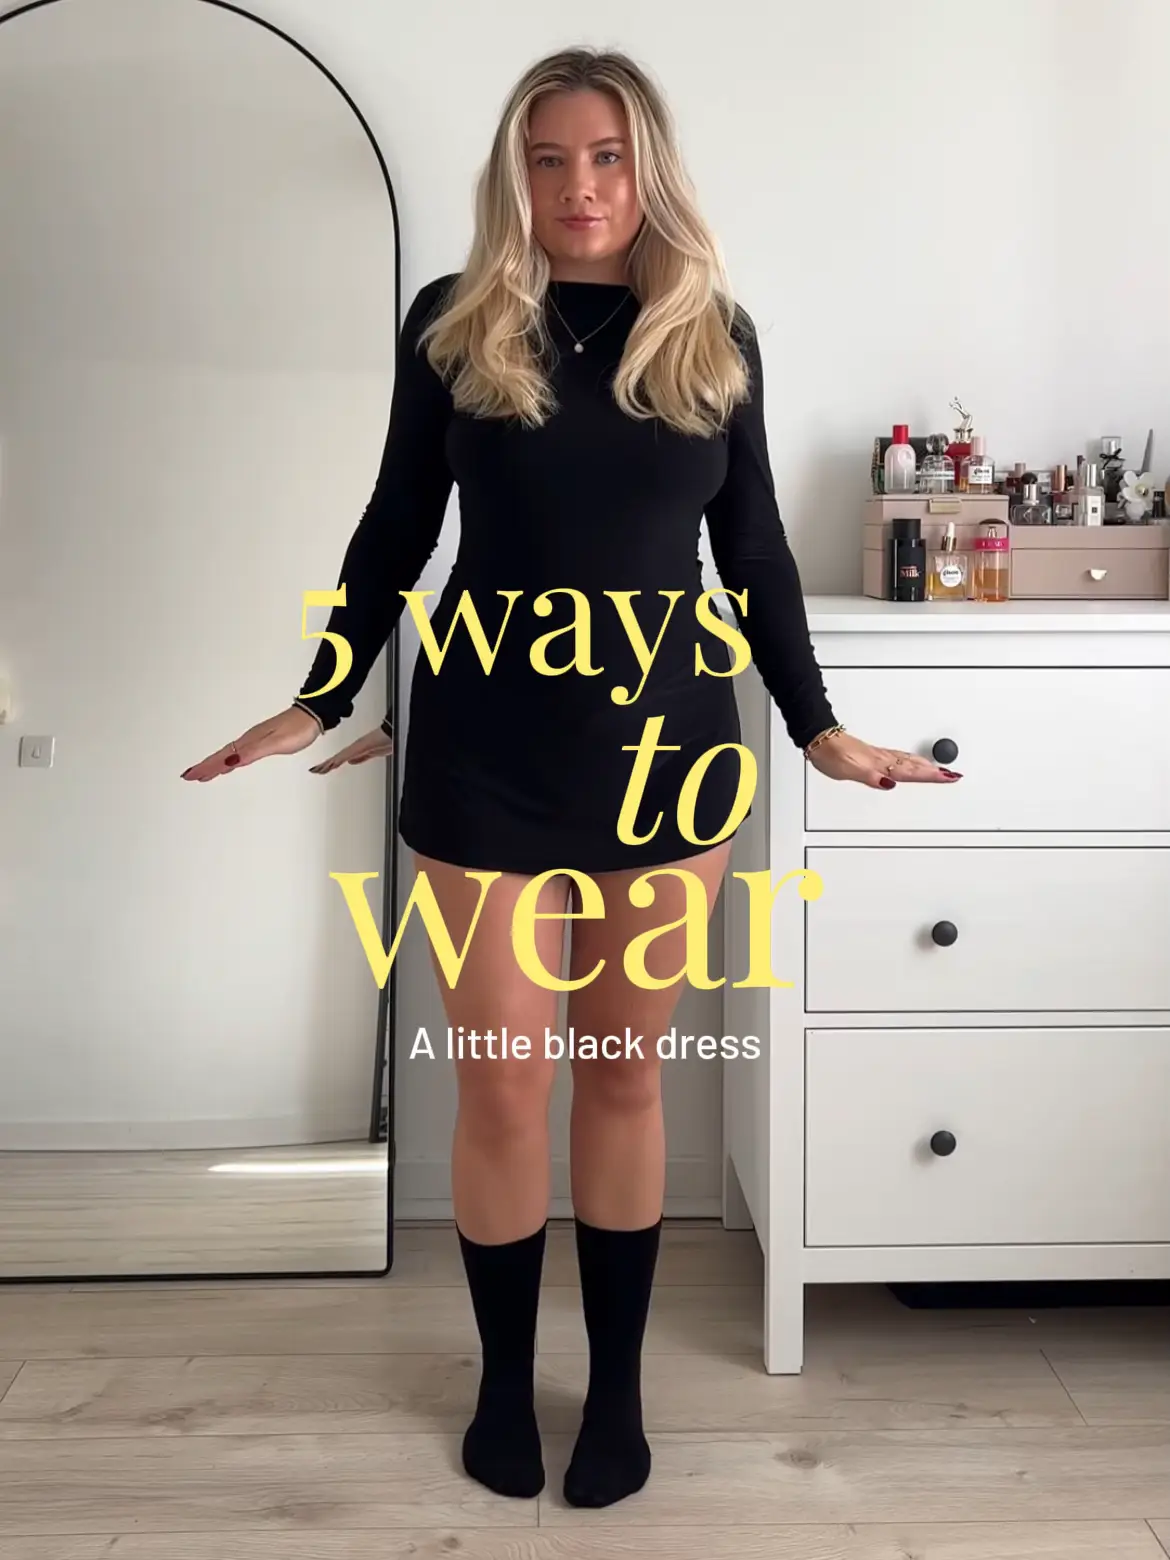 How to Wear Black Tights - Fashion Inspirations 